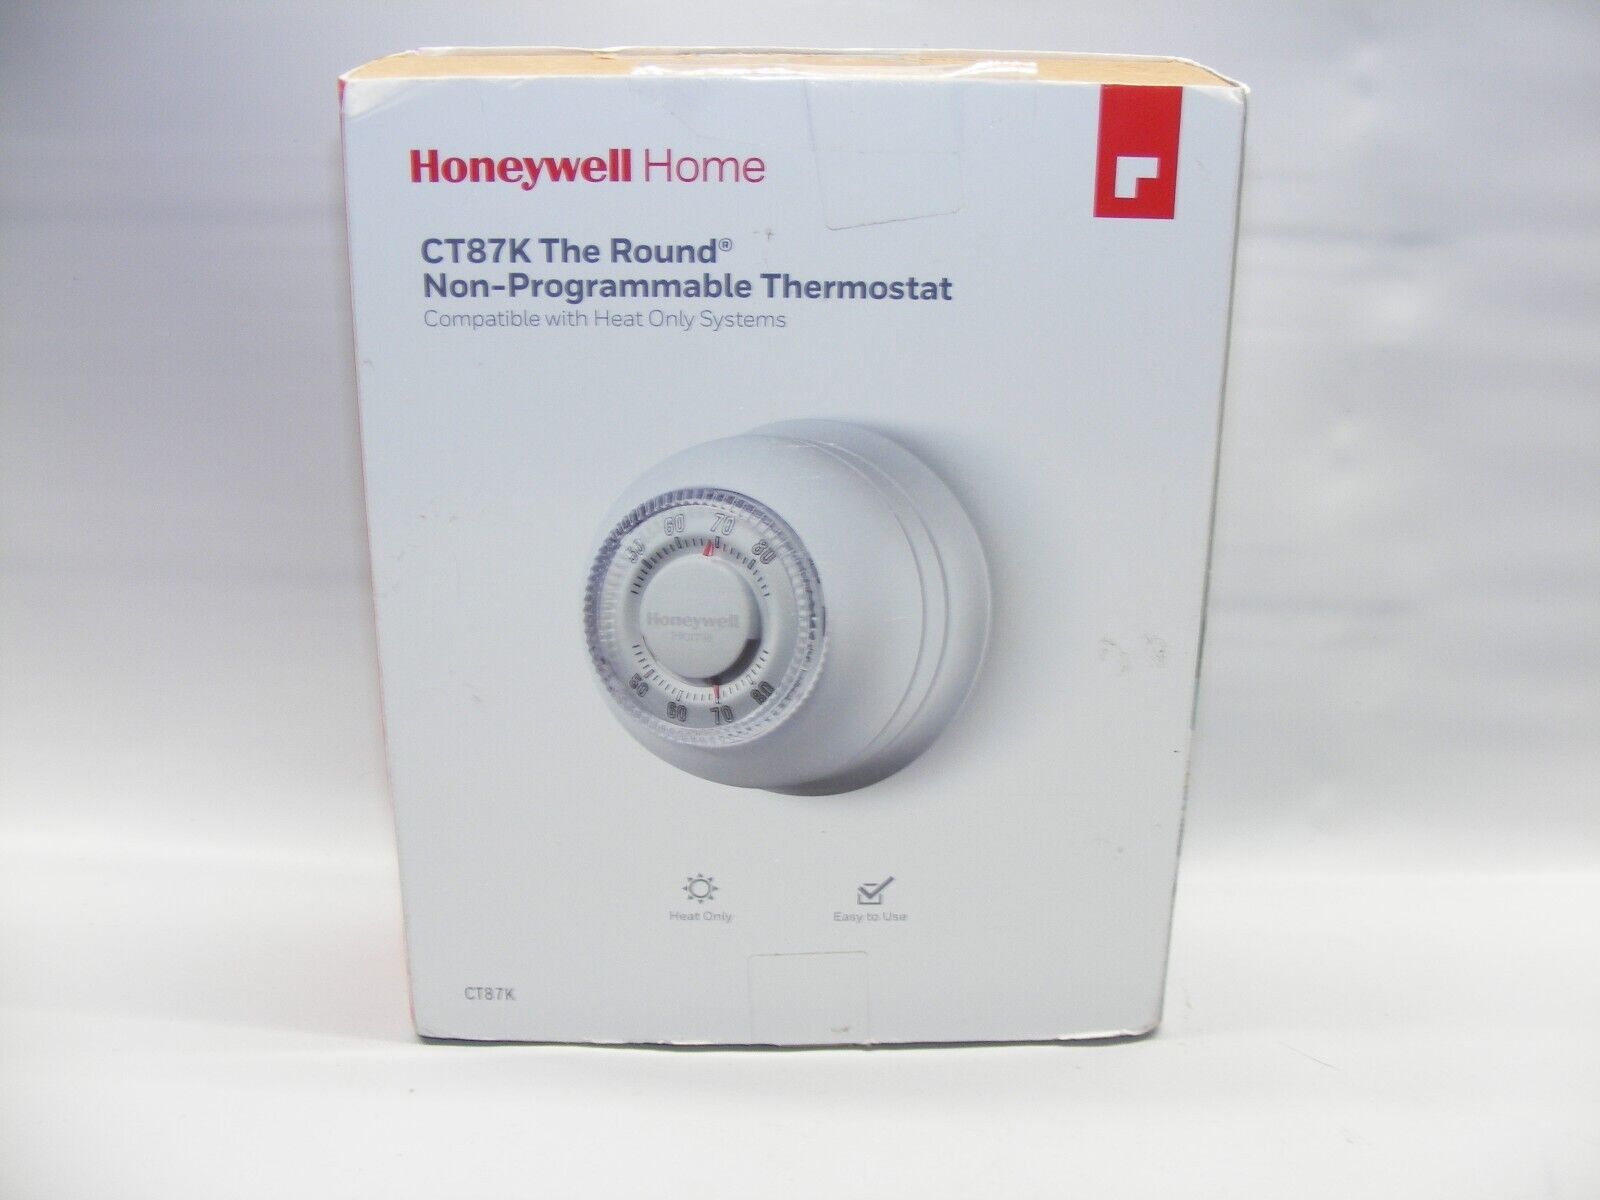 Honeywell CT87K1004 Manual Thermostat Heat Only Systems Round Non Programmable - $18.65